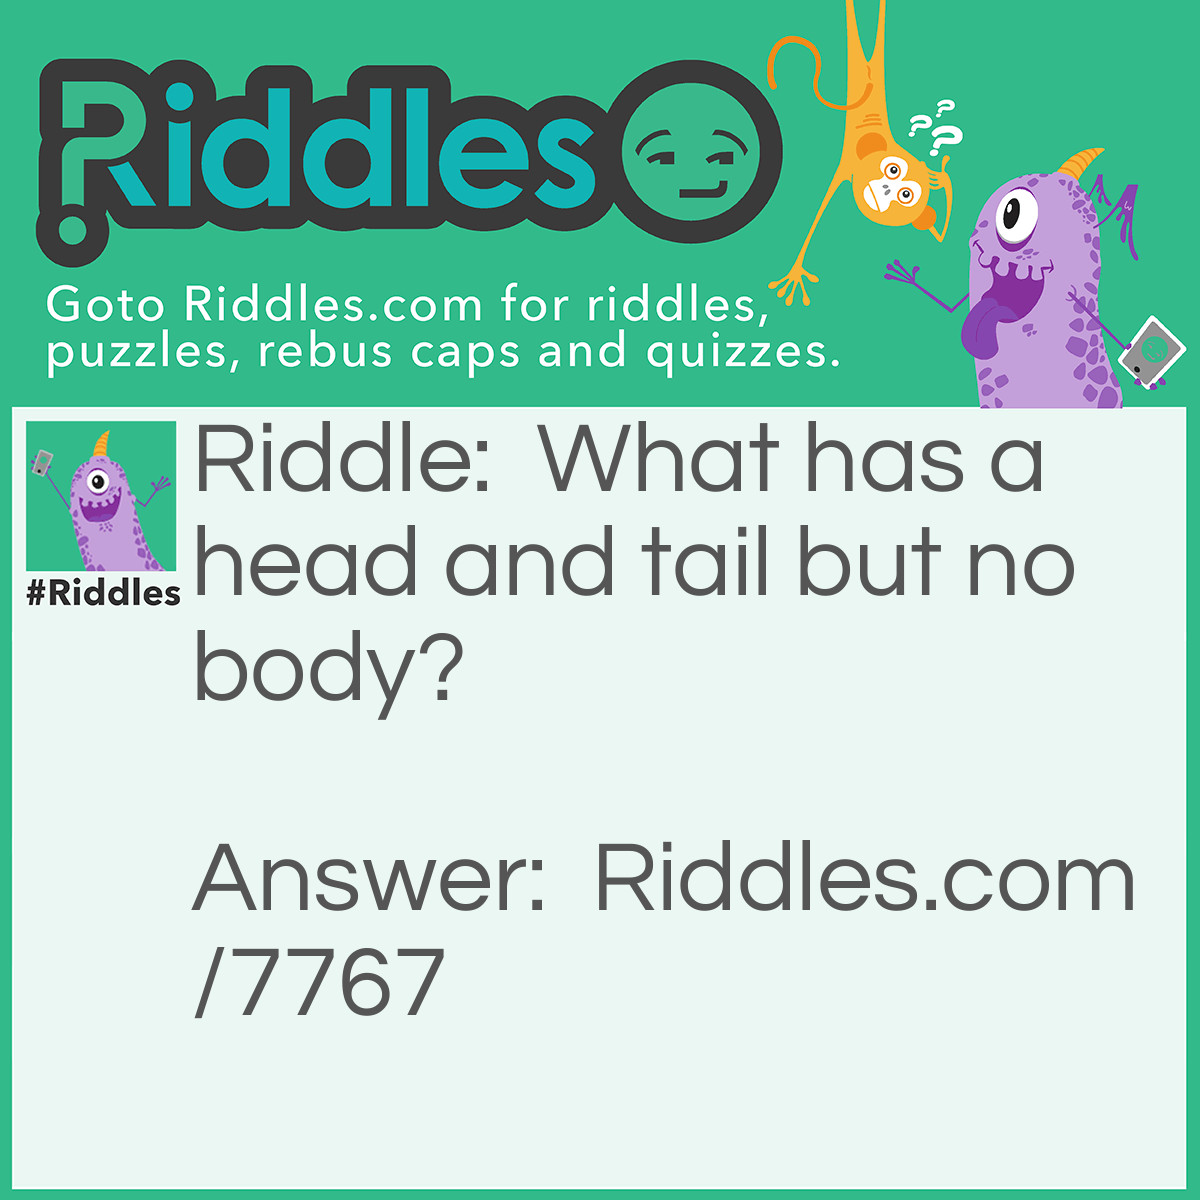 Riddle: What has a head and tail but no body? Answer: a coin